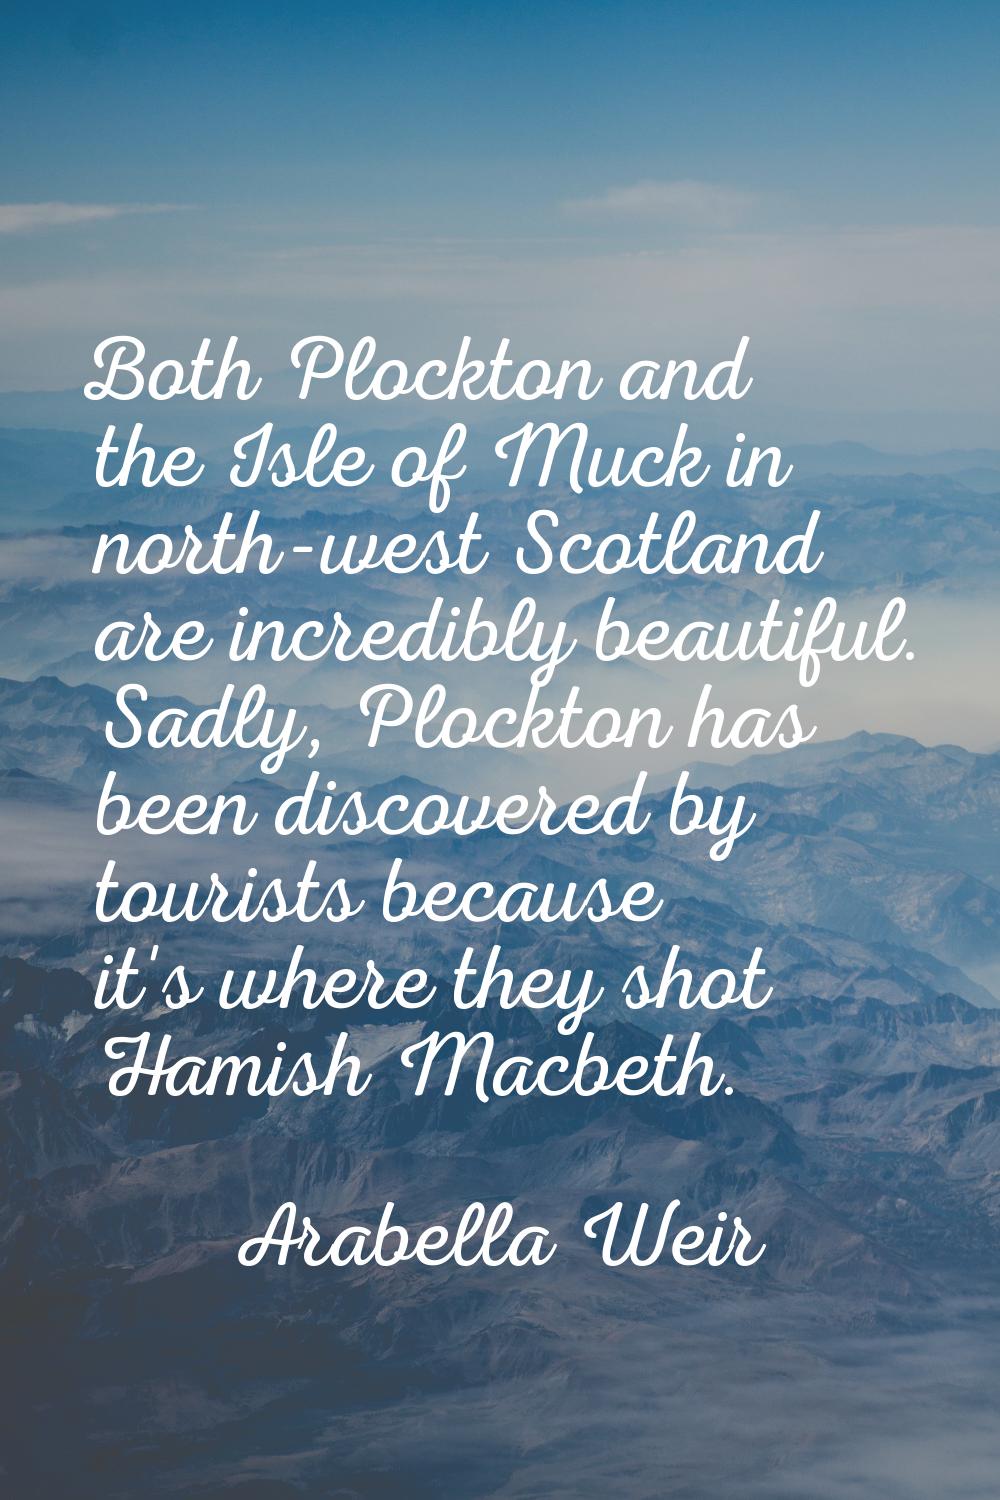 Both Plockton and the Isle of Muck in north-west Scotland are incredibly beautiful. Sadly, Plockton